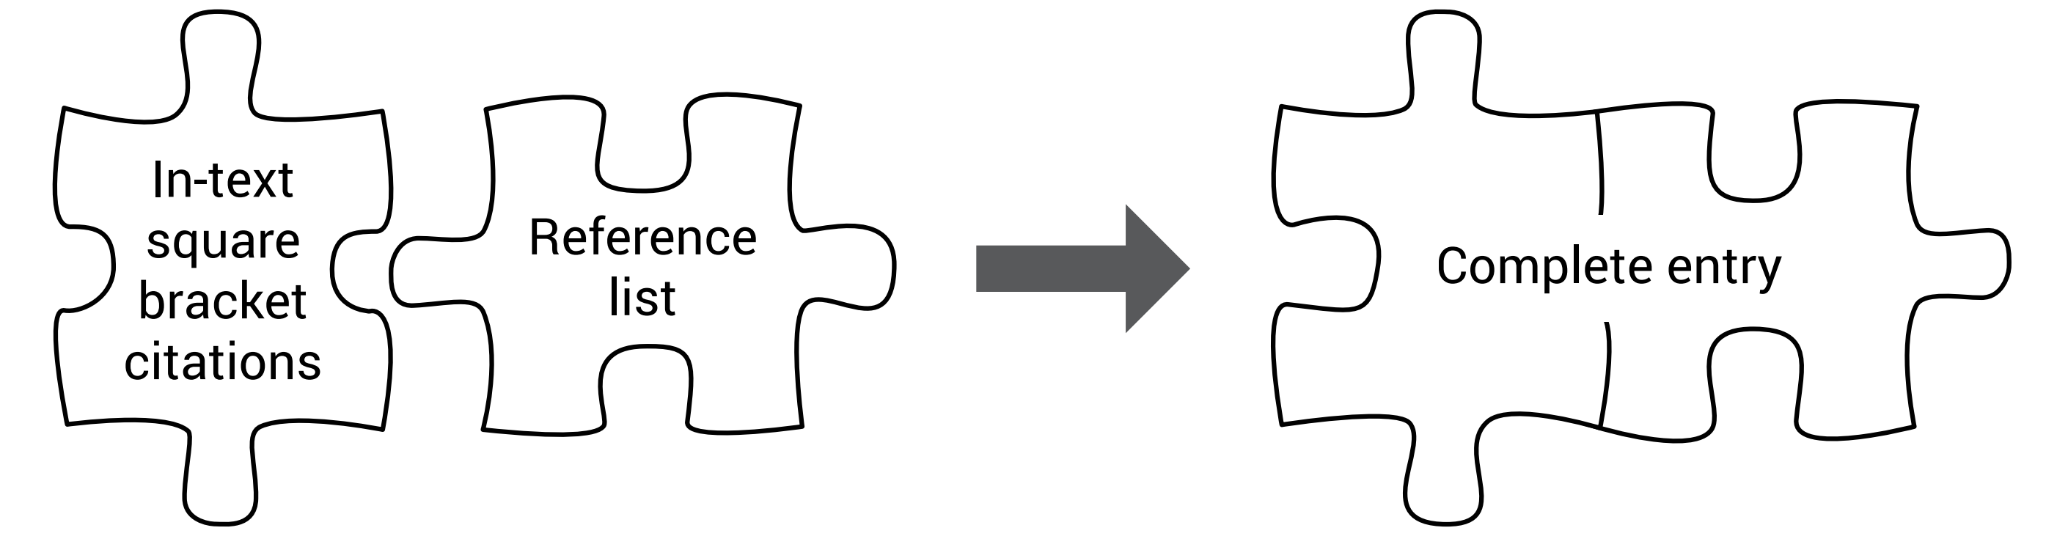 Two puzzle pieces, labelled "in-text square bracket citations" and "reference list" form a complete IEEE citation together.